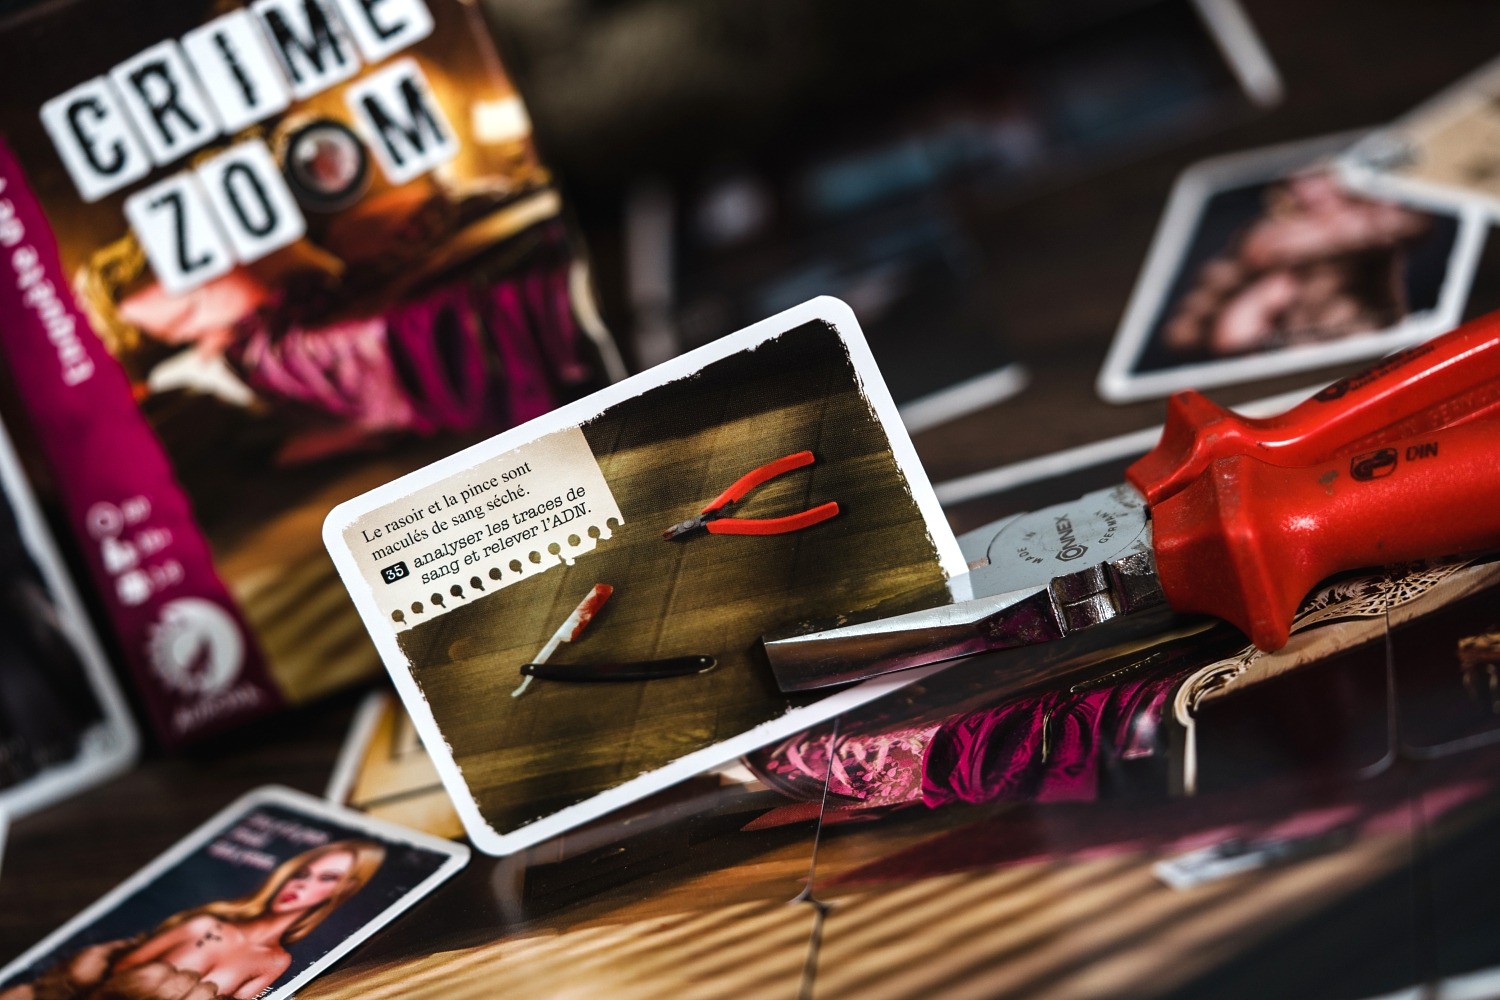 Crime zoom no furs aurora games boardgame photography